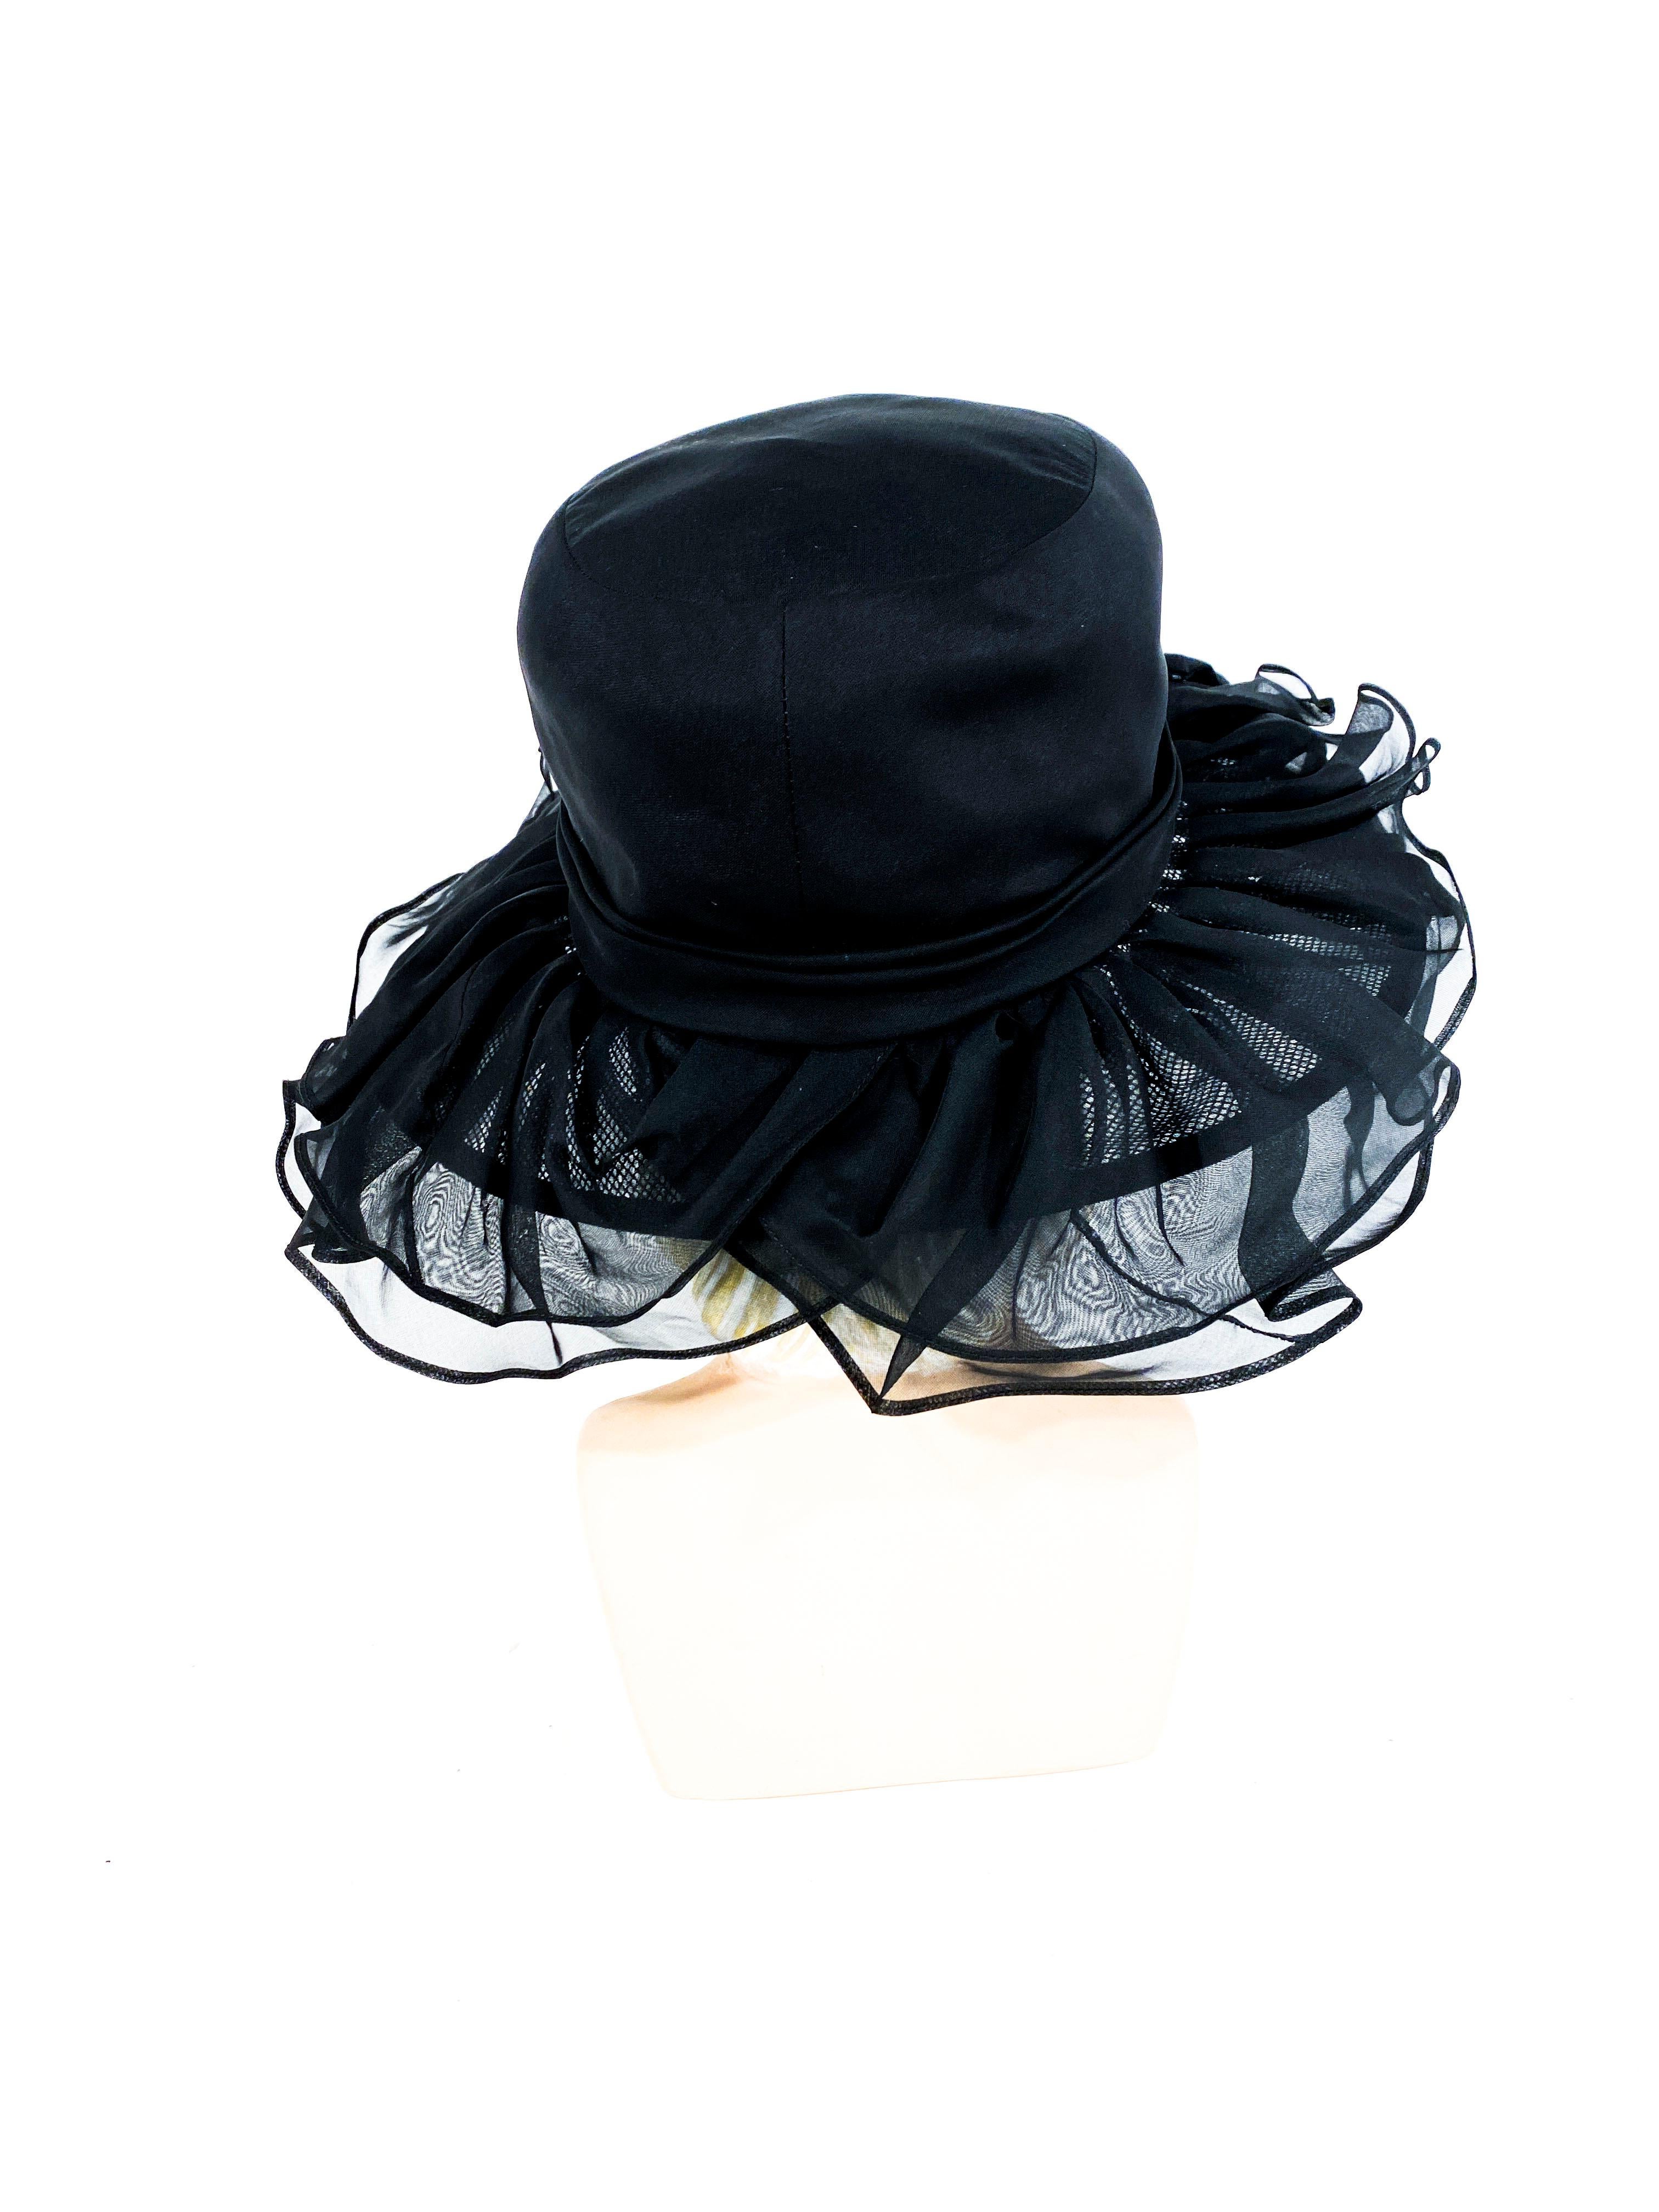 1960s/1970s Black Ruffled Wide Brimmed Hat 1